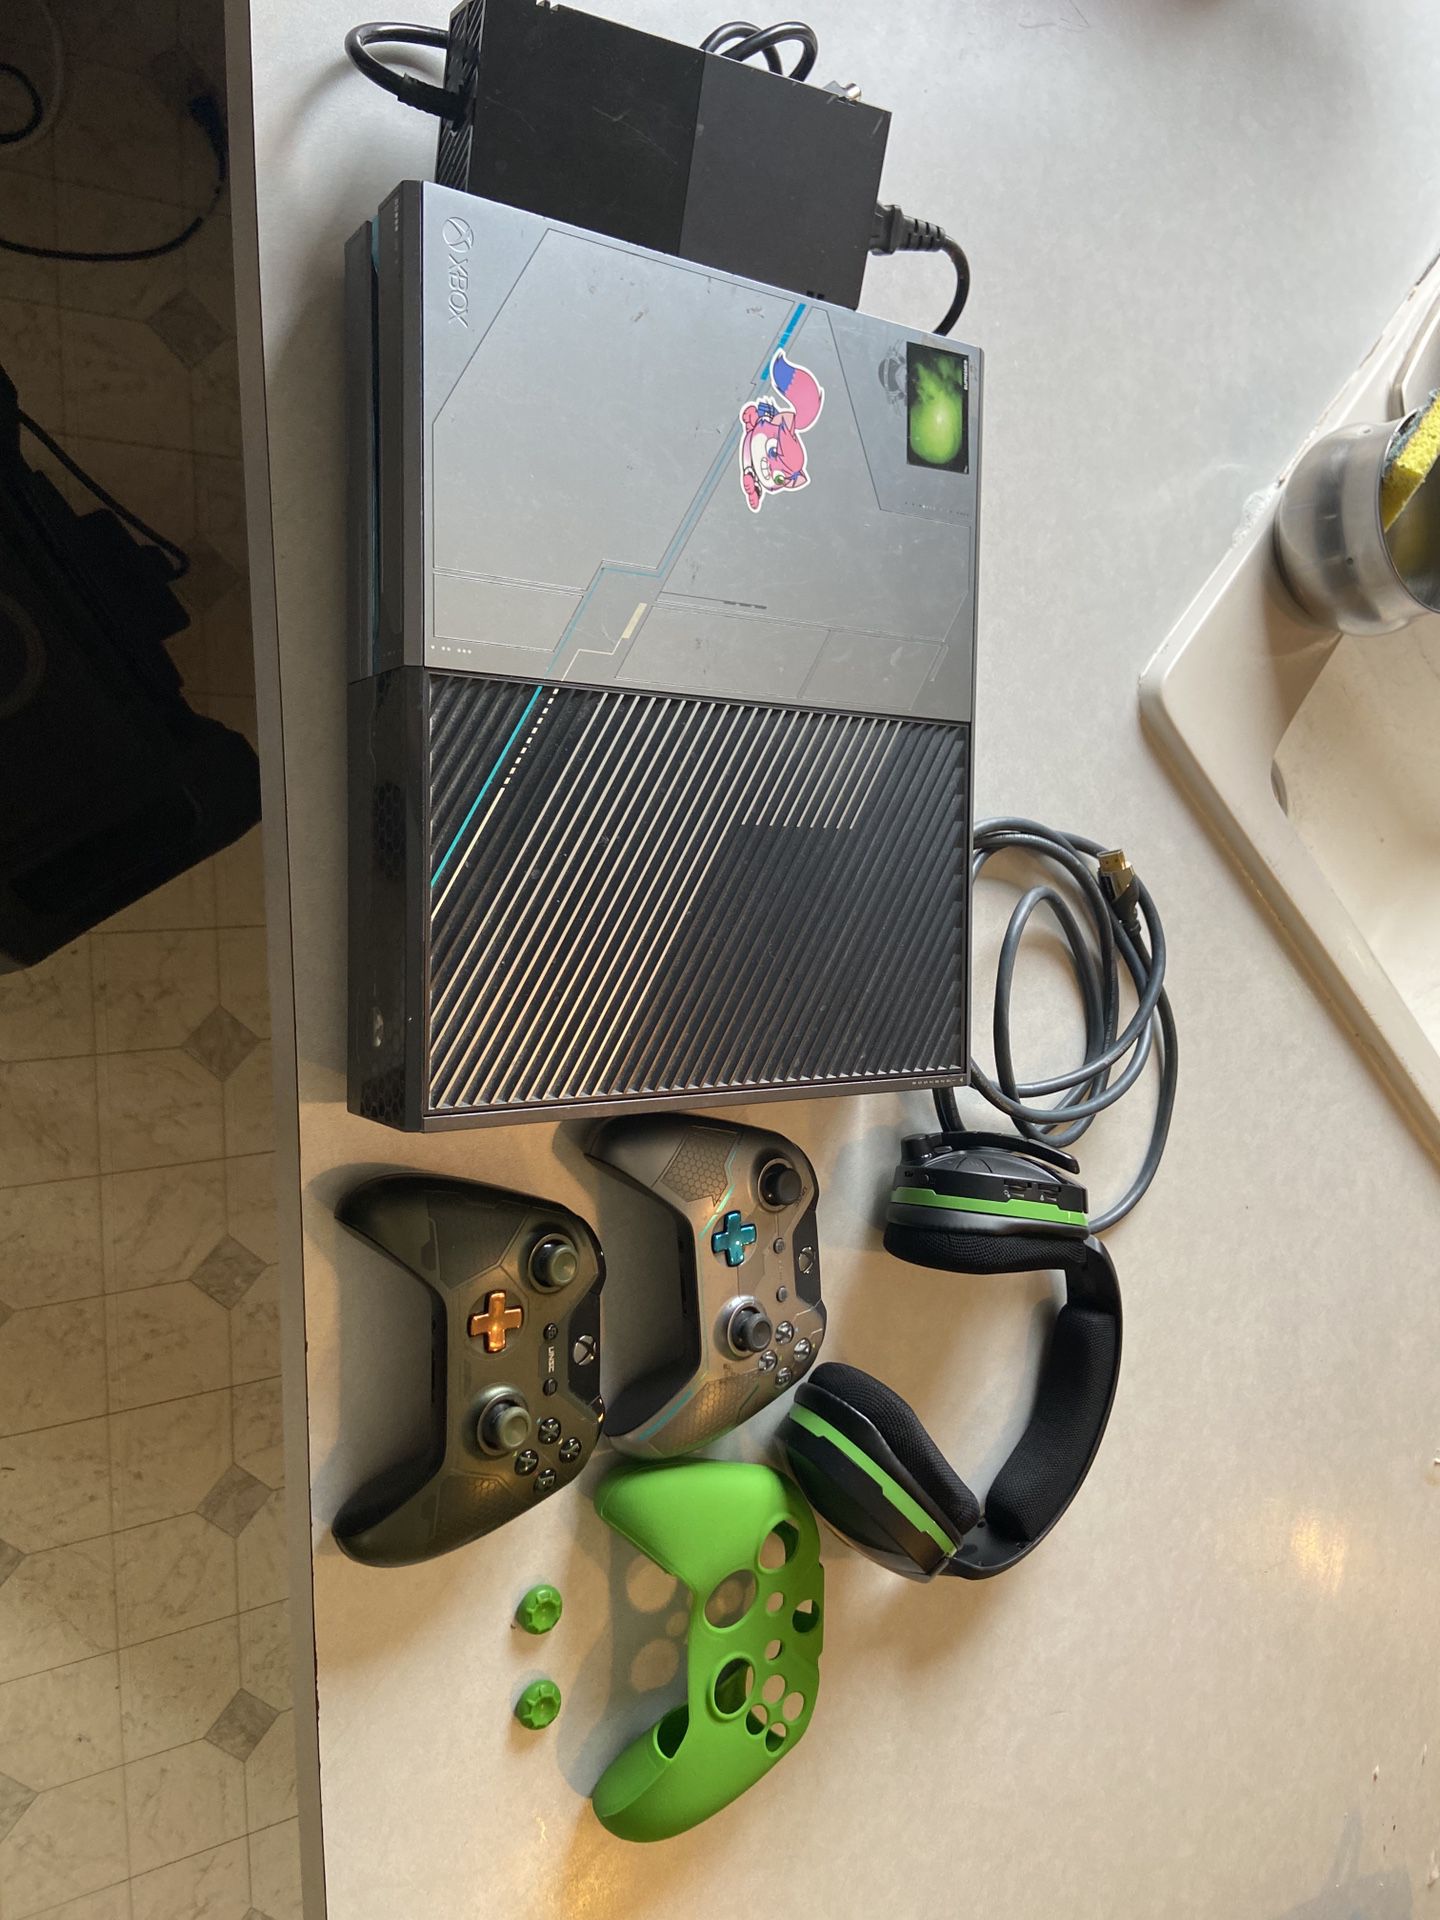 Xbox one halo 5 limited edition